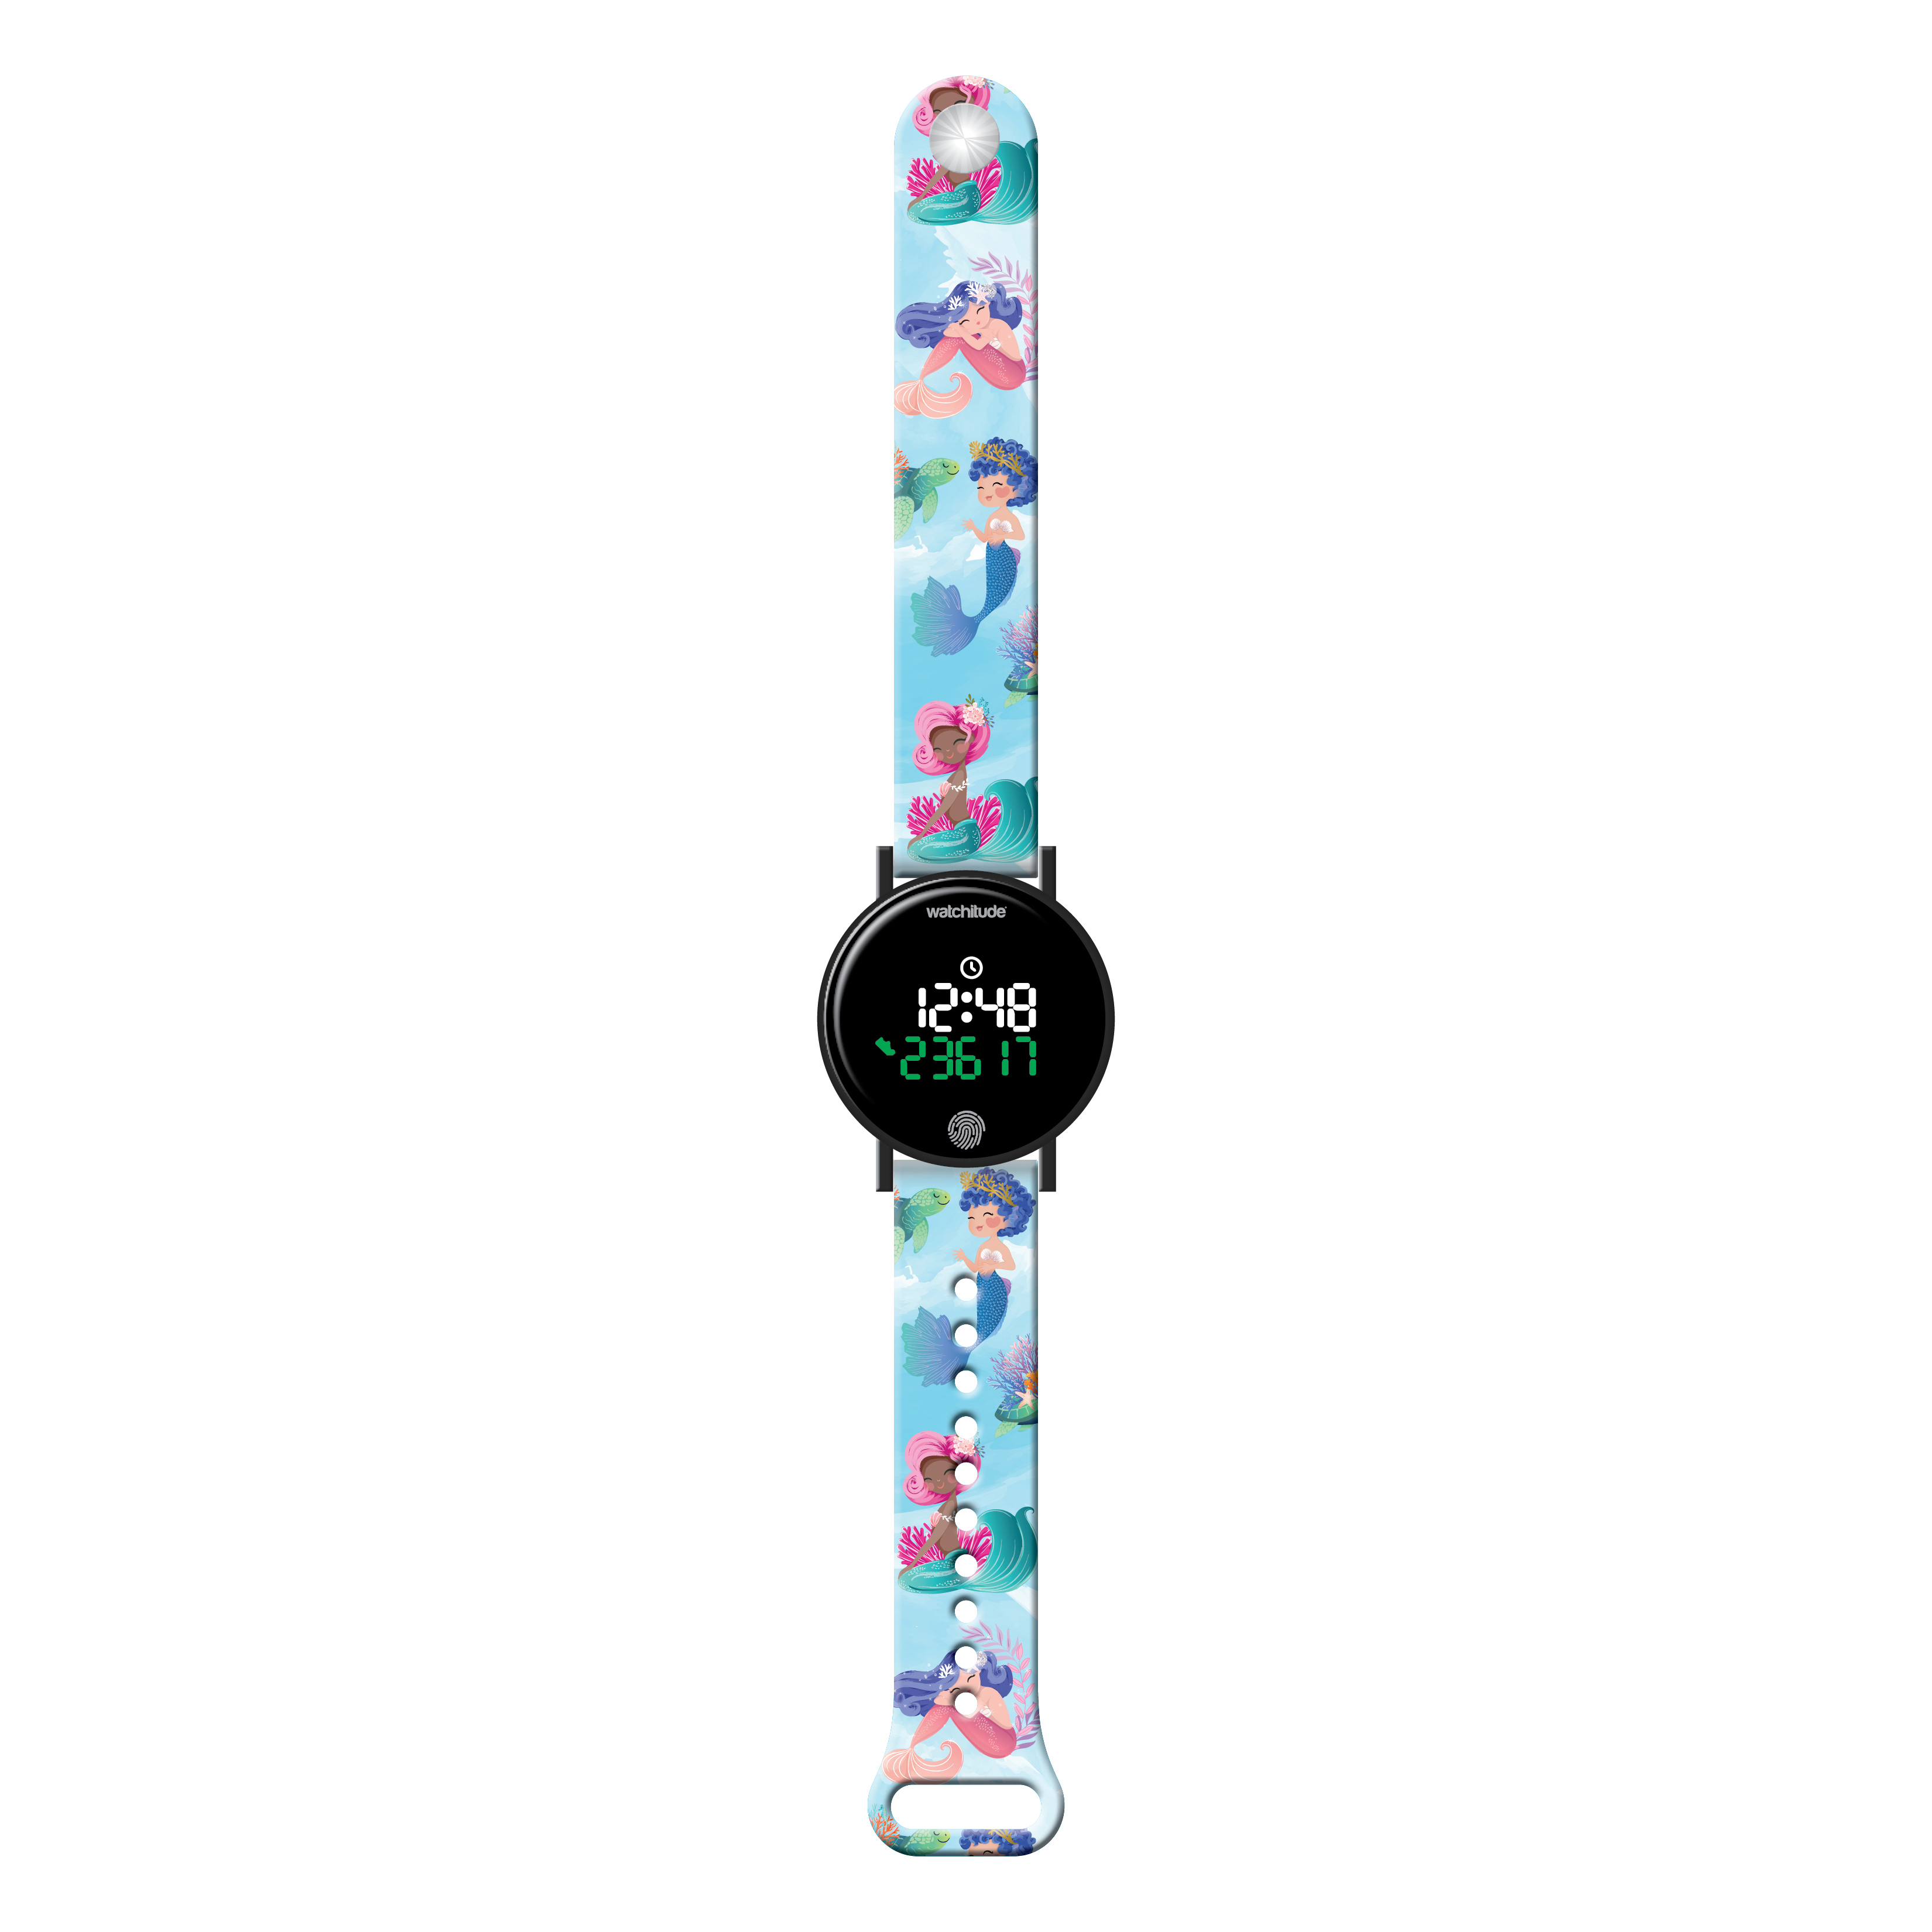 Mermaids Party - Step Counter Watch